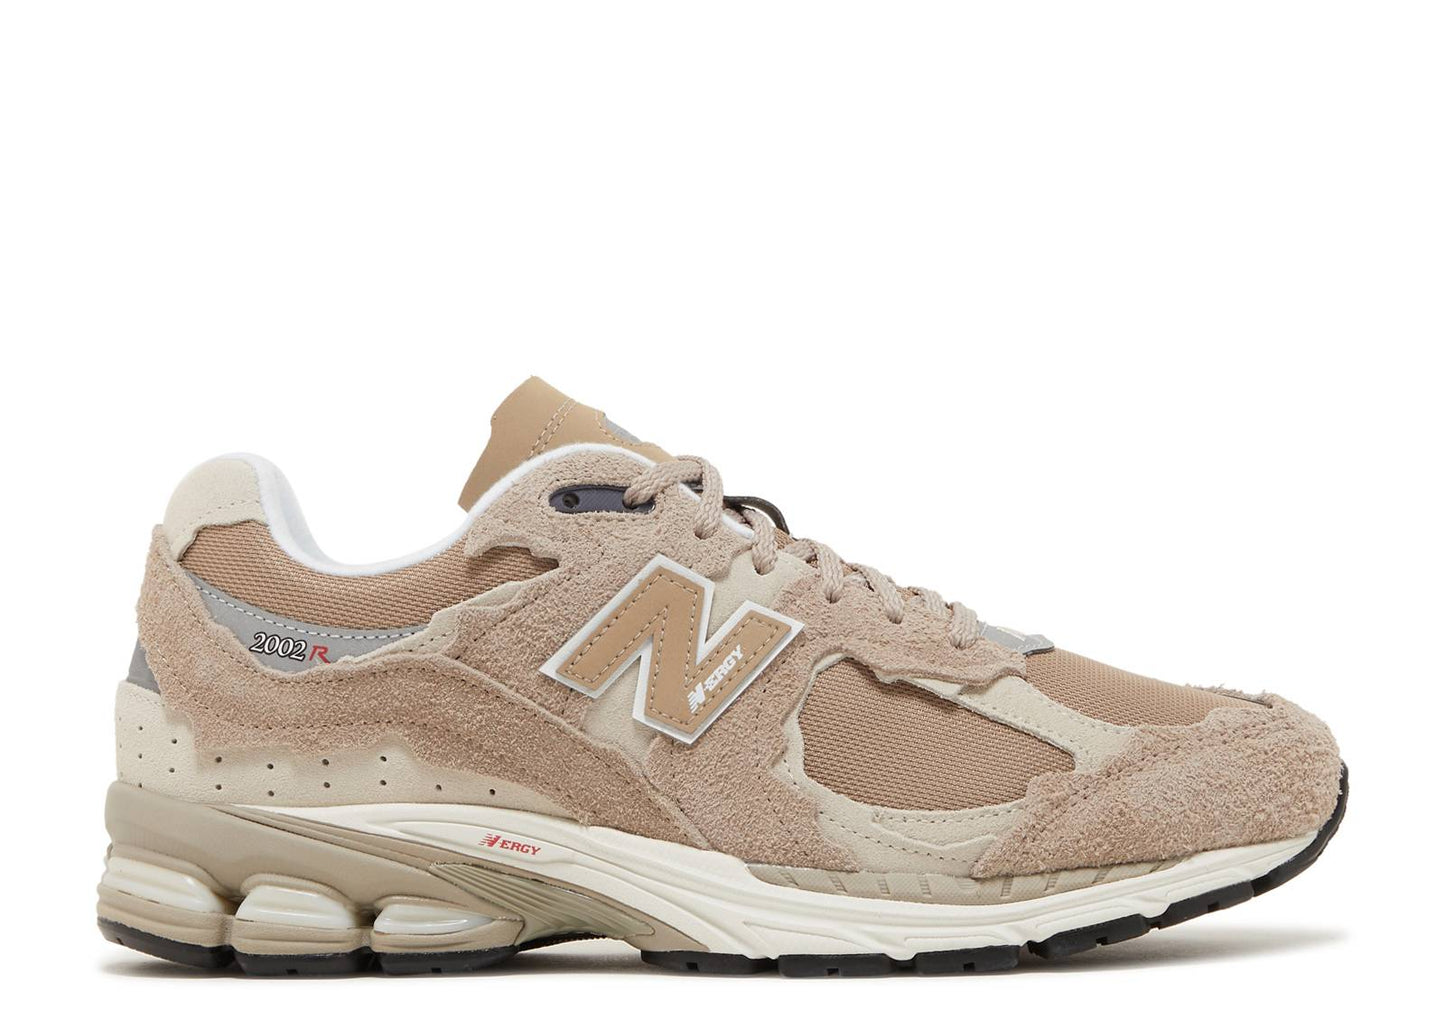 New Balance 2002R Protection Pack "Driftwood"